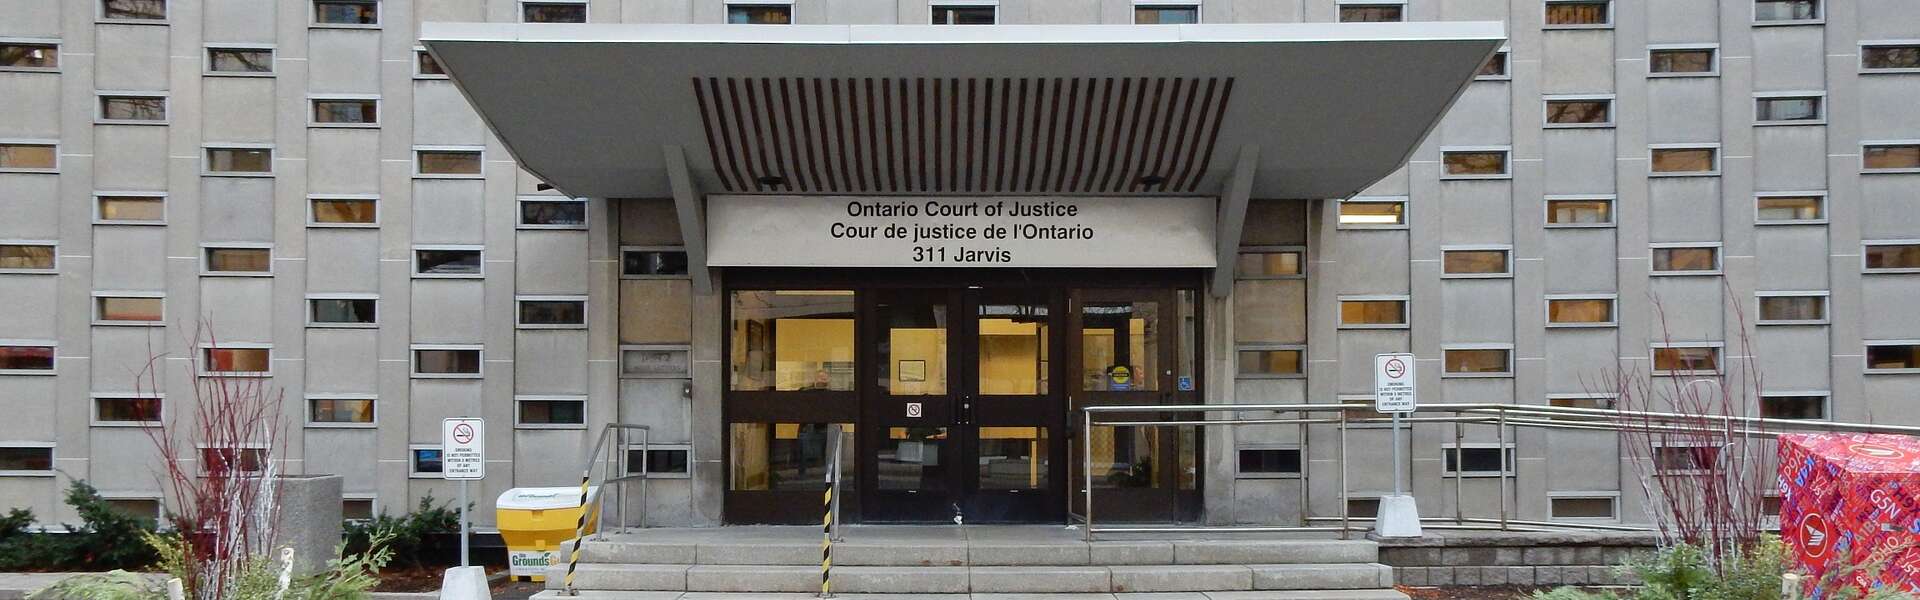 The entrance to an Ontario Court of Justice.